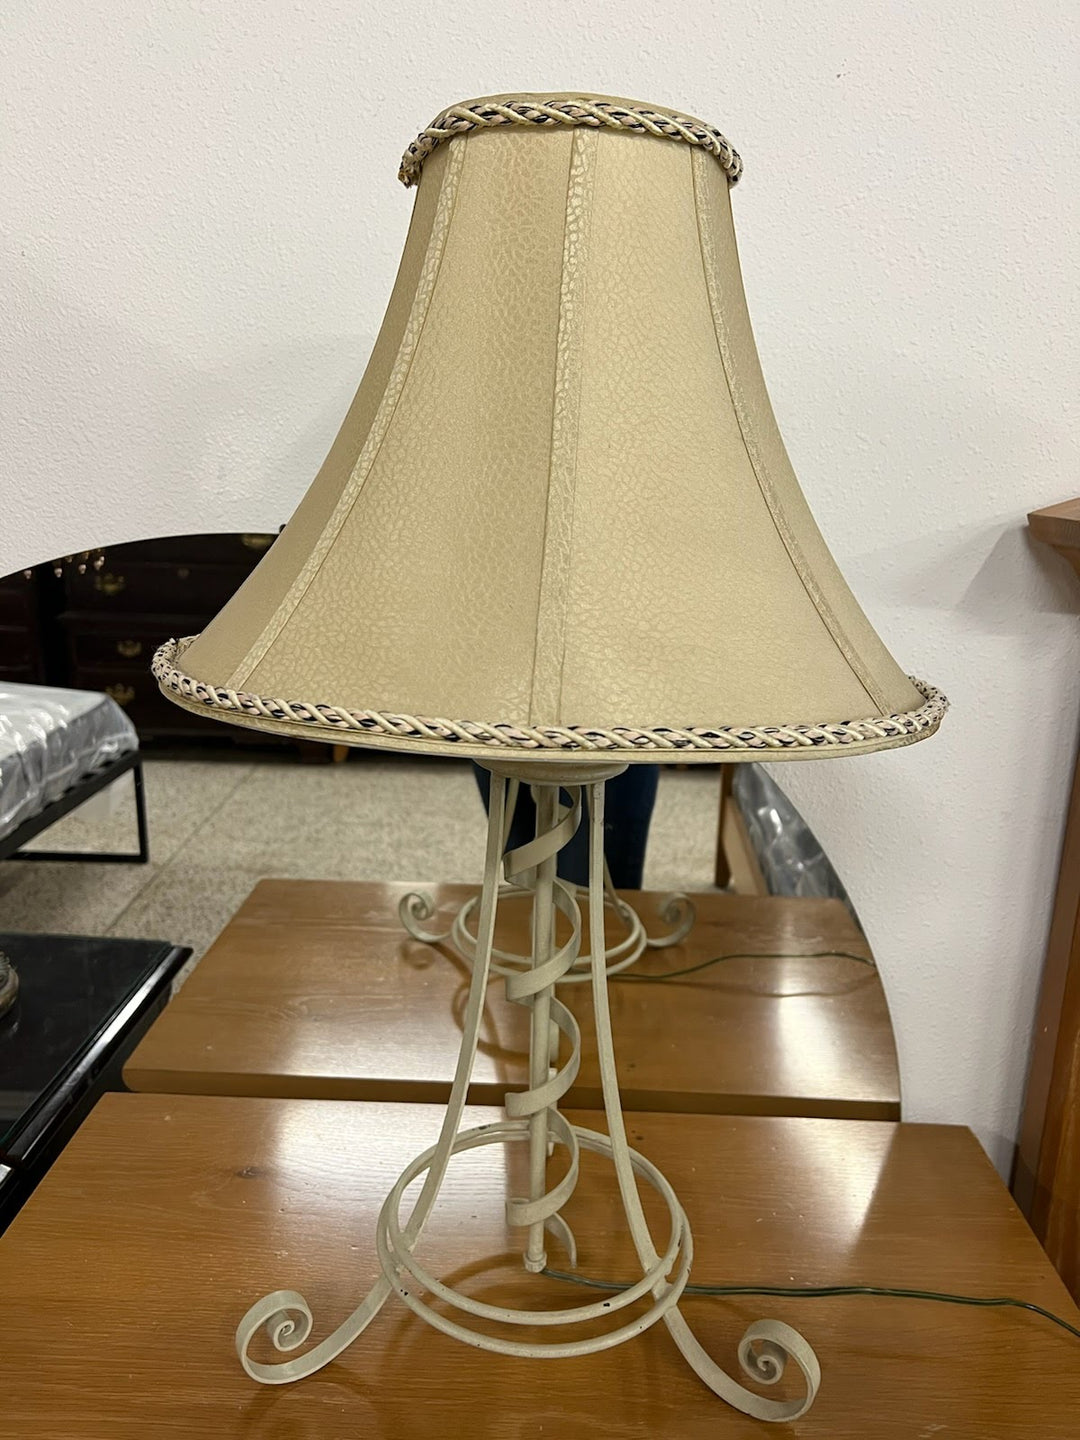 Tan wire table lamp